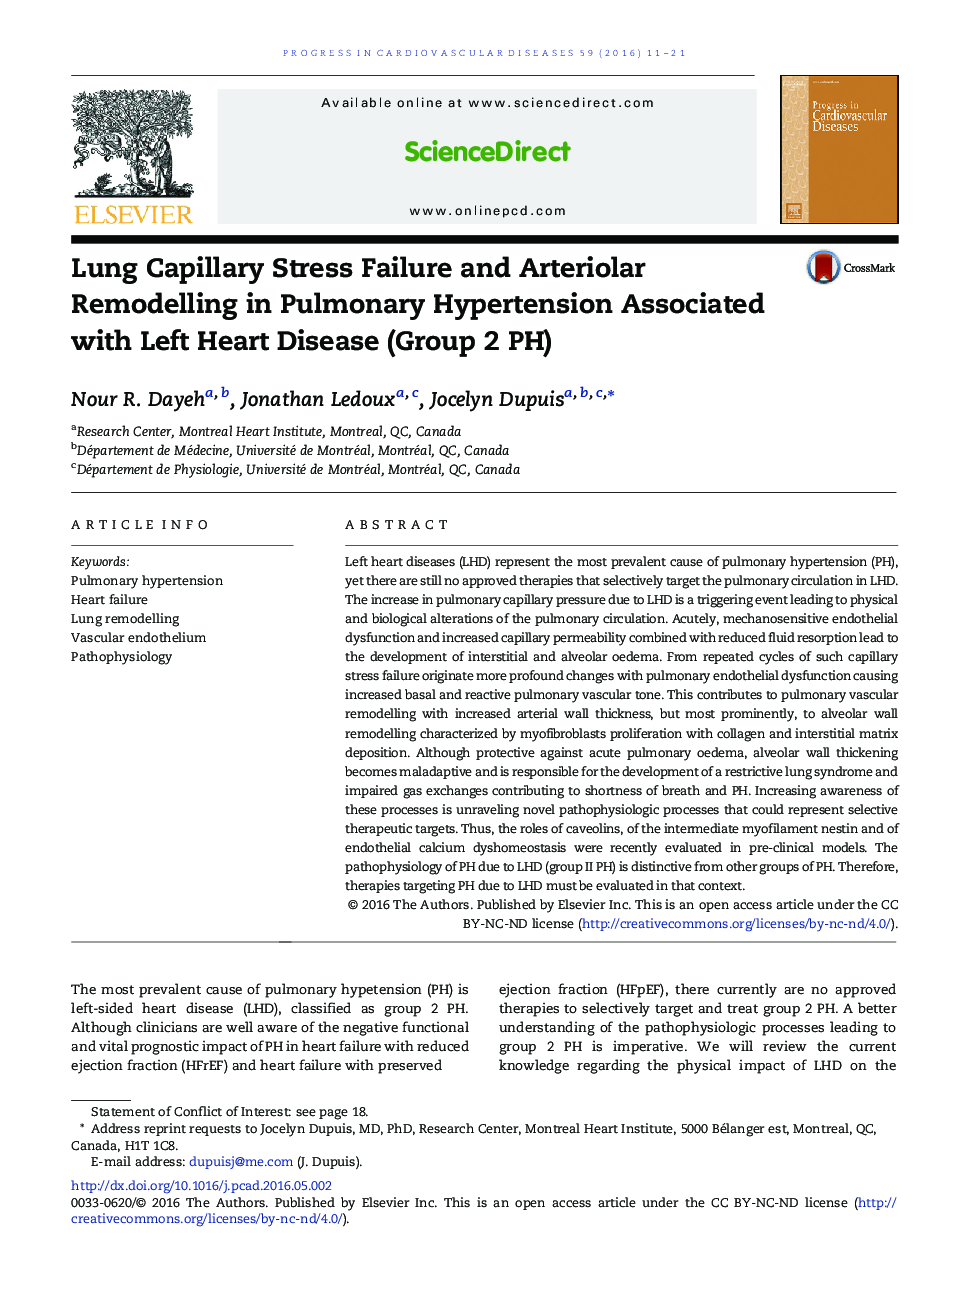 Lung Capillary Stress Failure and Arteriolar Remodelling in Pulmonary Hypertension Associated with Left Heart Disease (Group 2 PH)